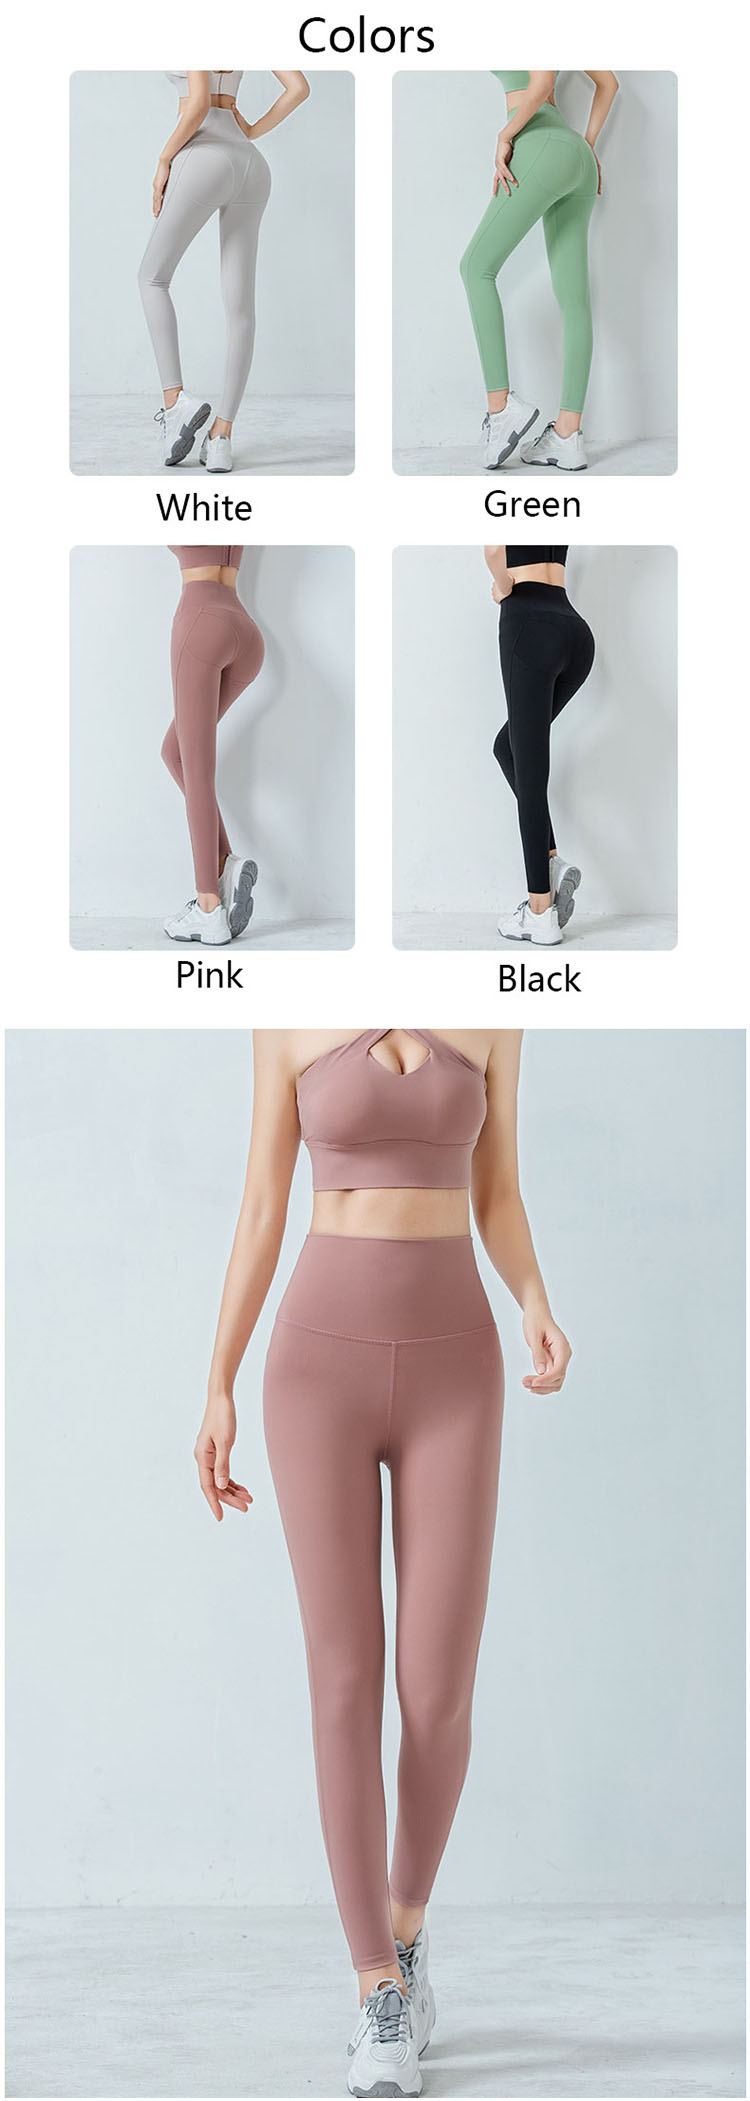 The buttocks design, outlines the perfect peach buttocks.